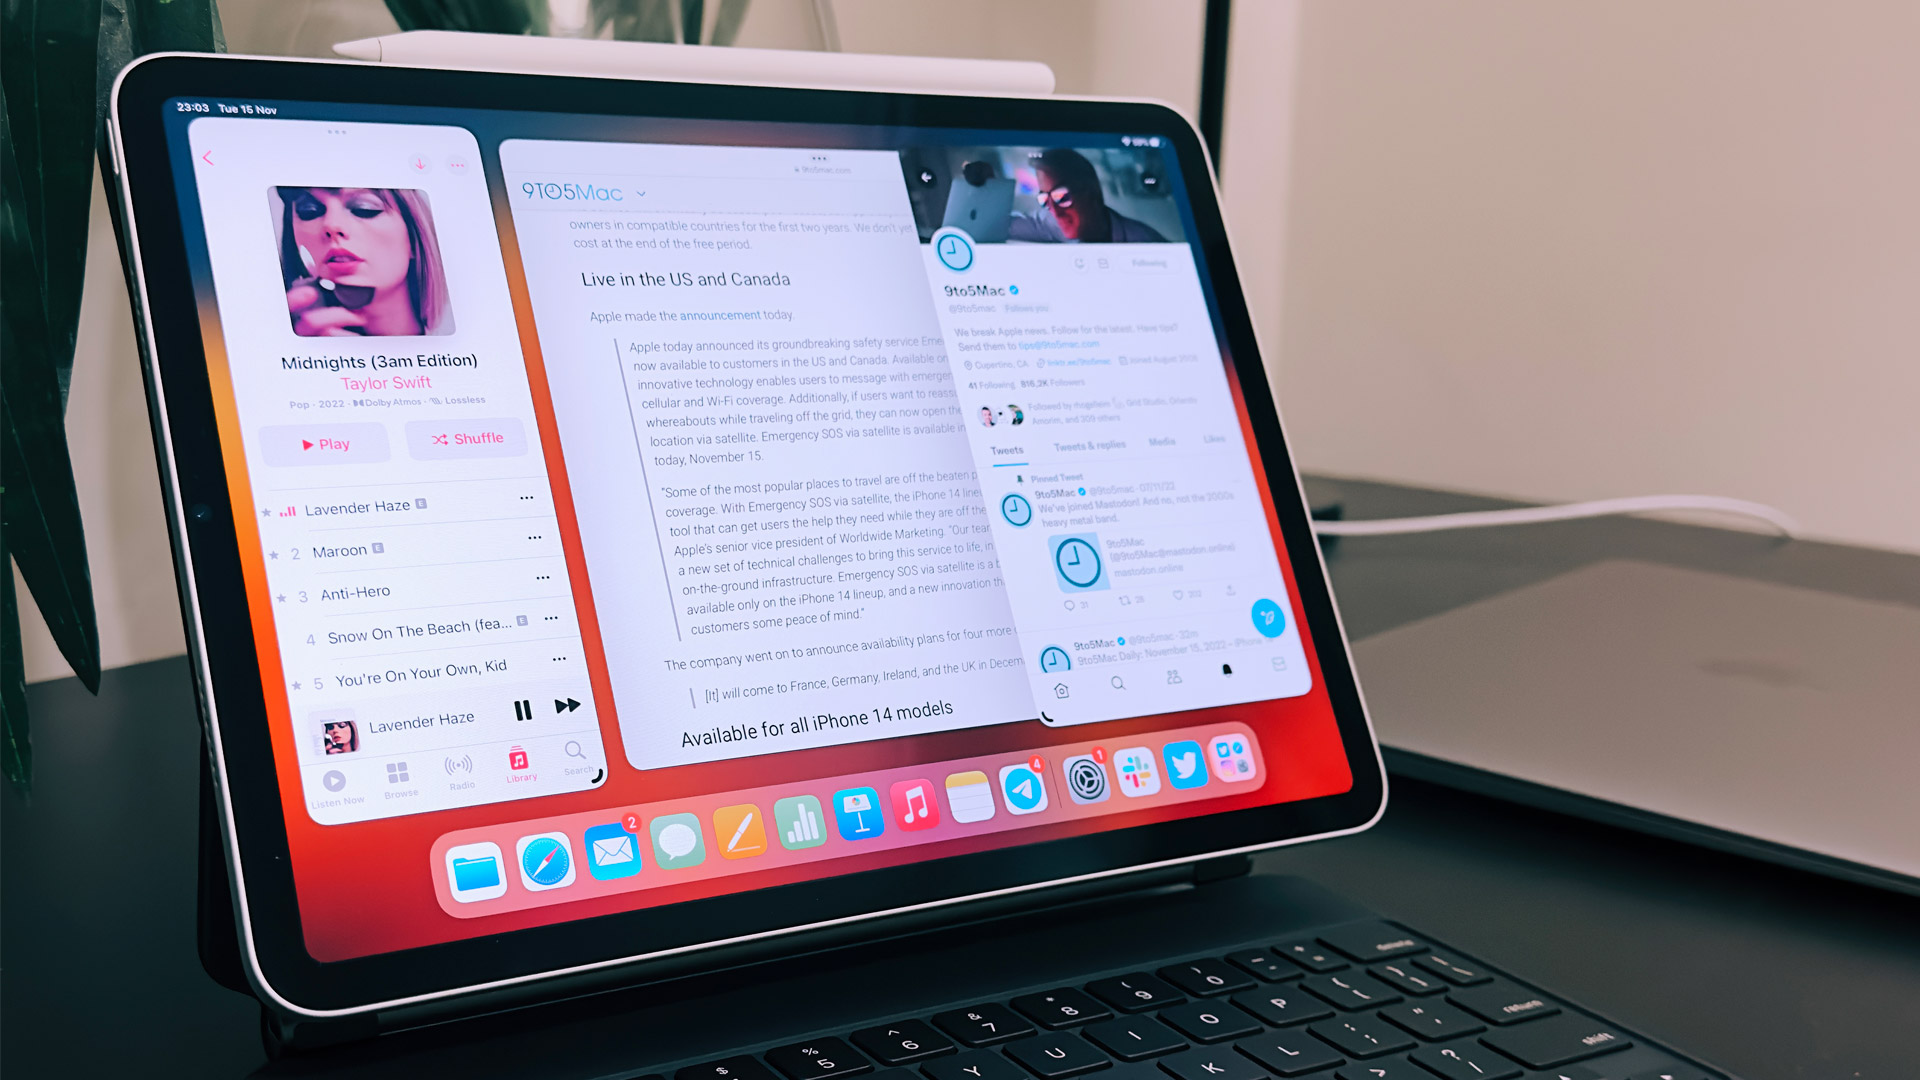 iPad Pro doesn't need a major revamp, but better software